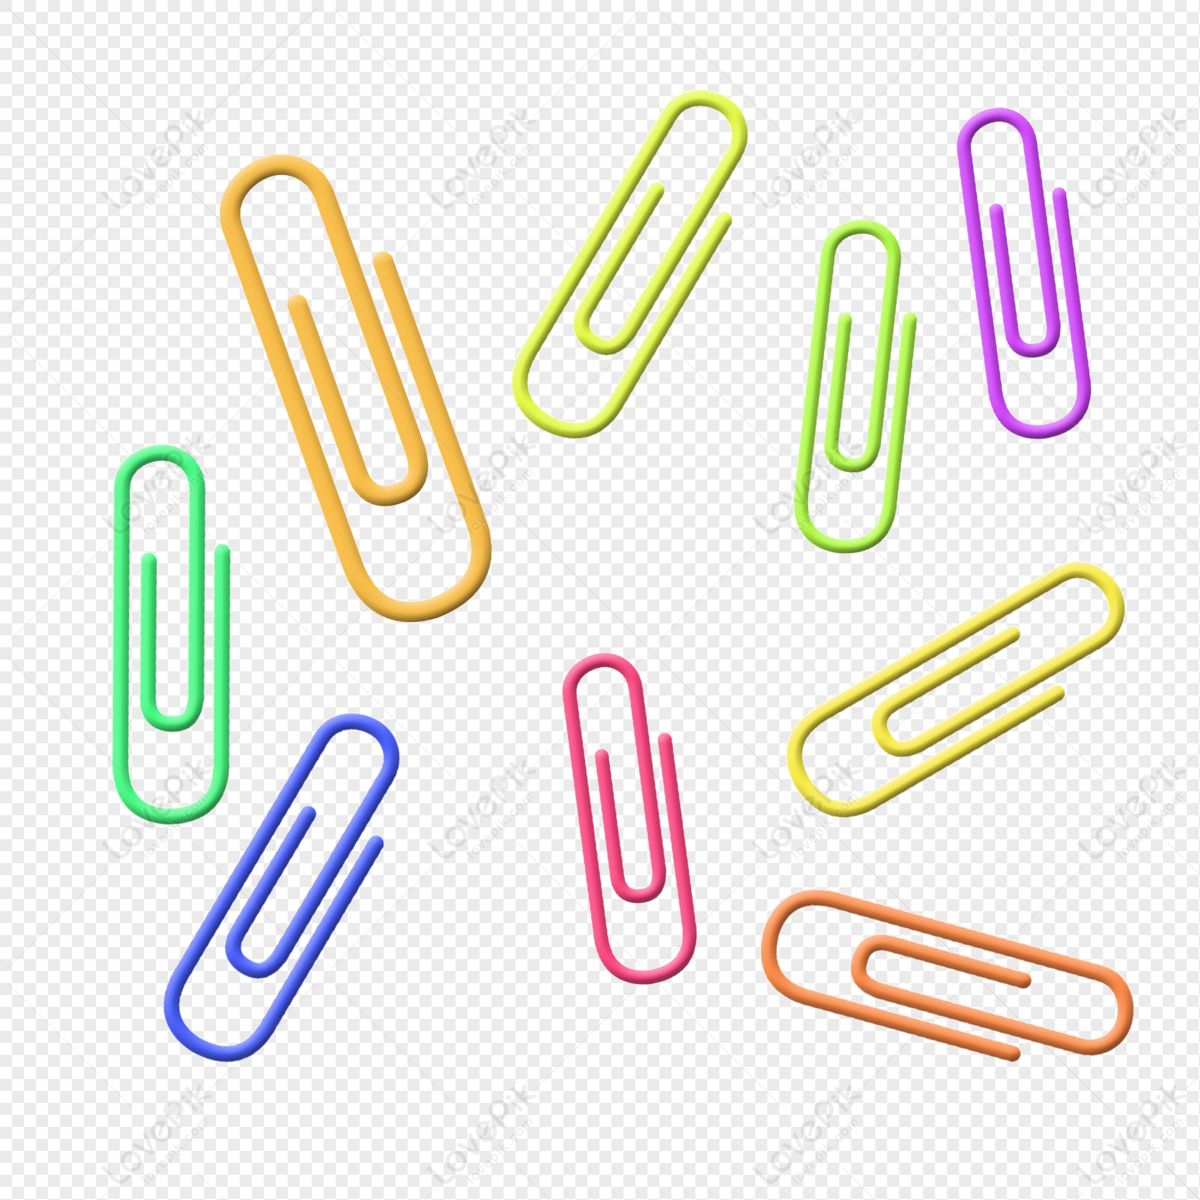 Paper Clip Cartoon Illustration Free PNG And Clipart Image For Free  Download - Lovepik | 401498459